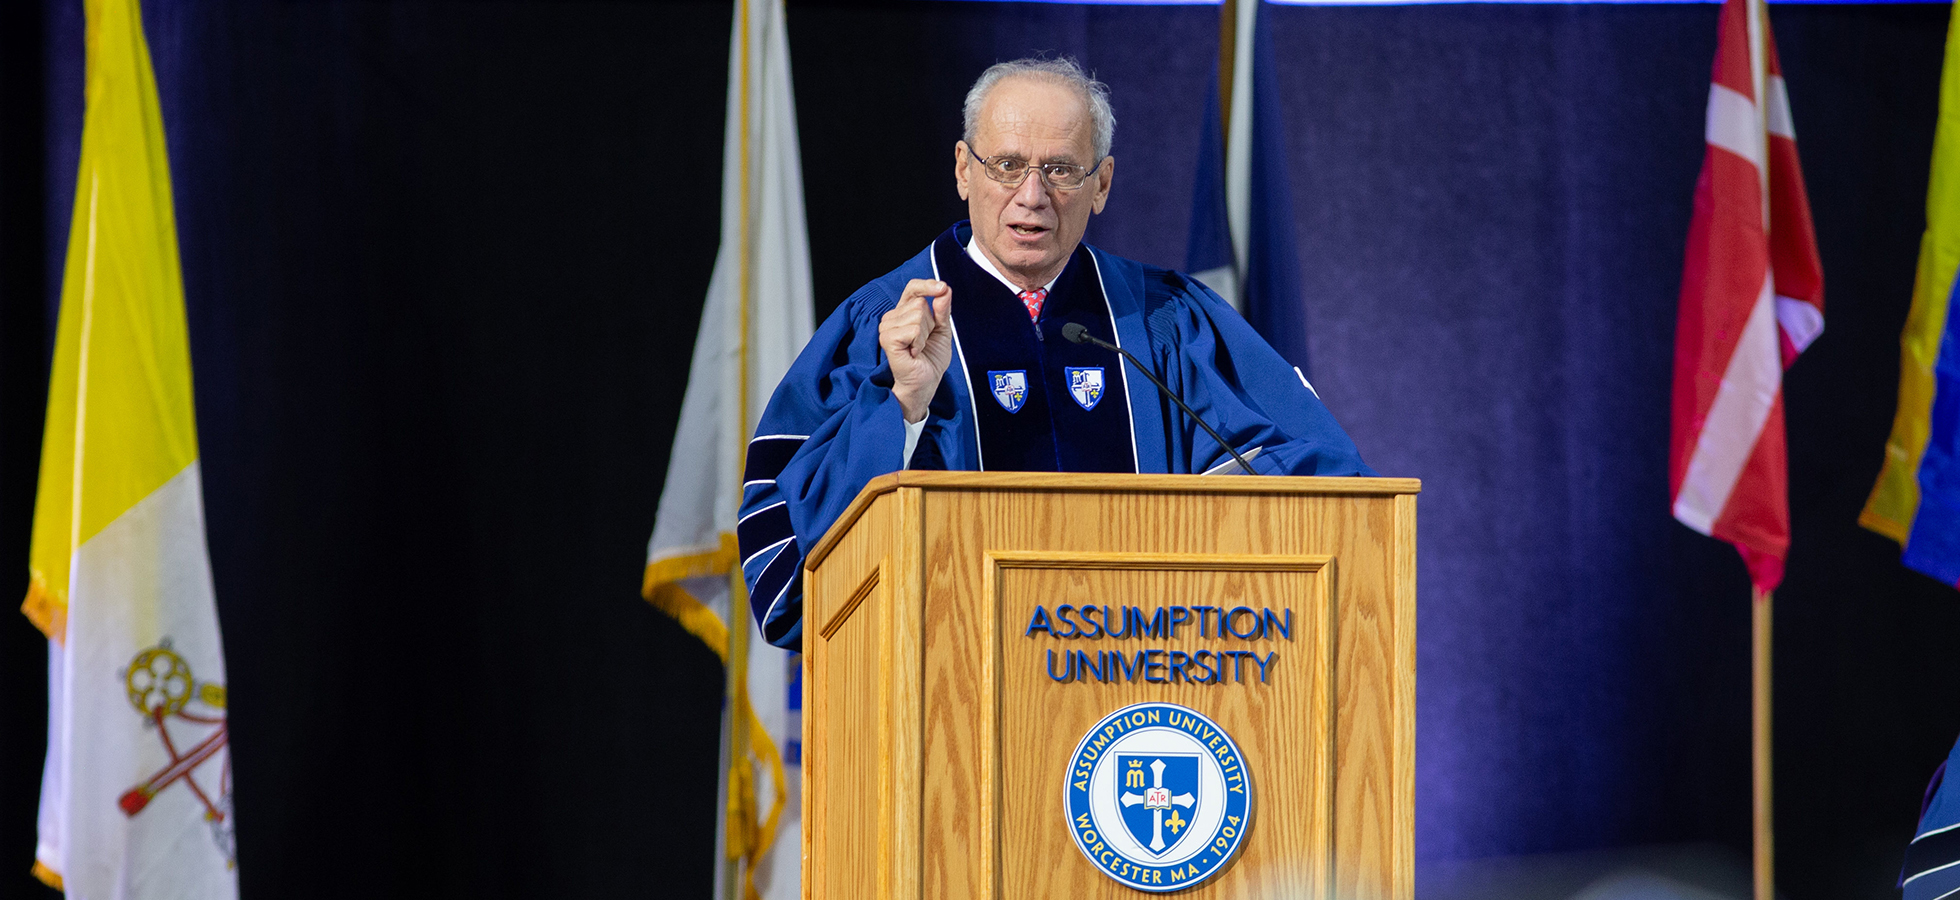 President of the Worcester Red Sox Larry Lucchino speaking at the Assumption University Commencement.